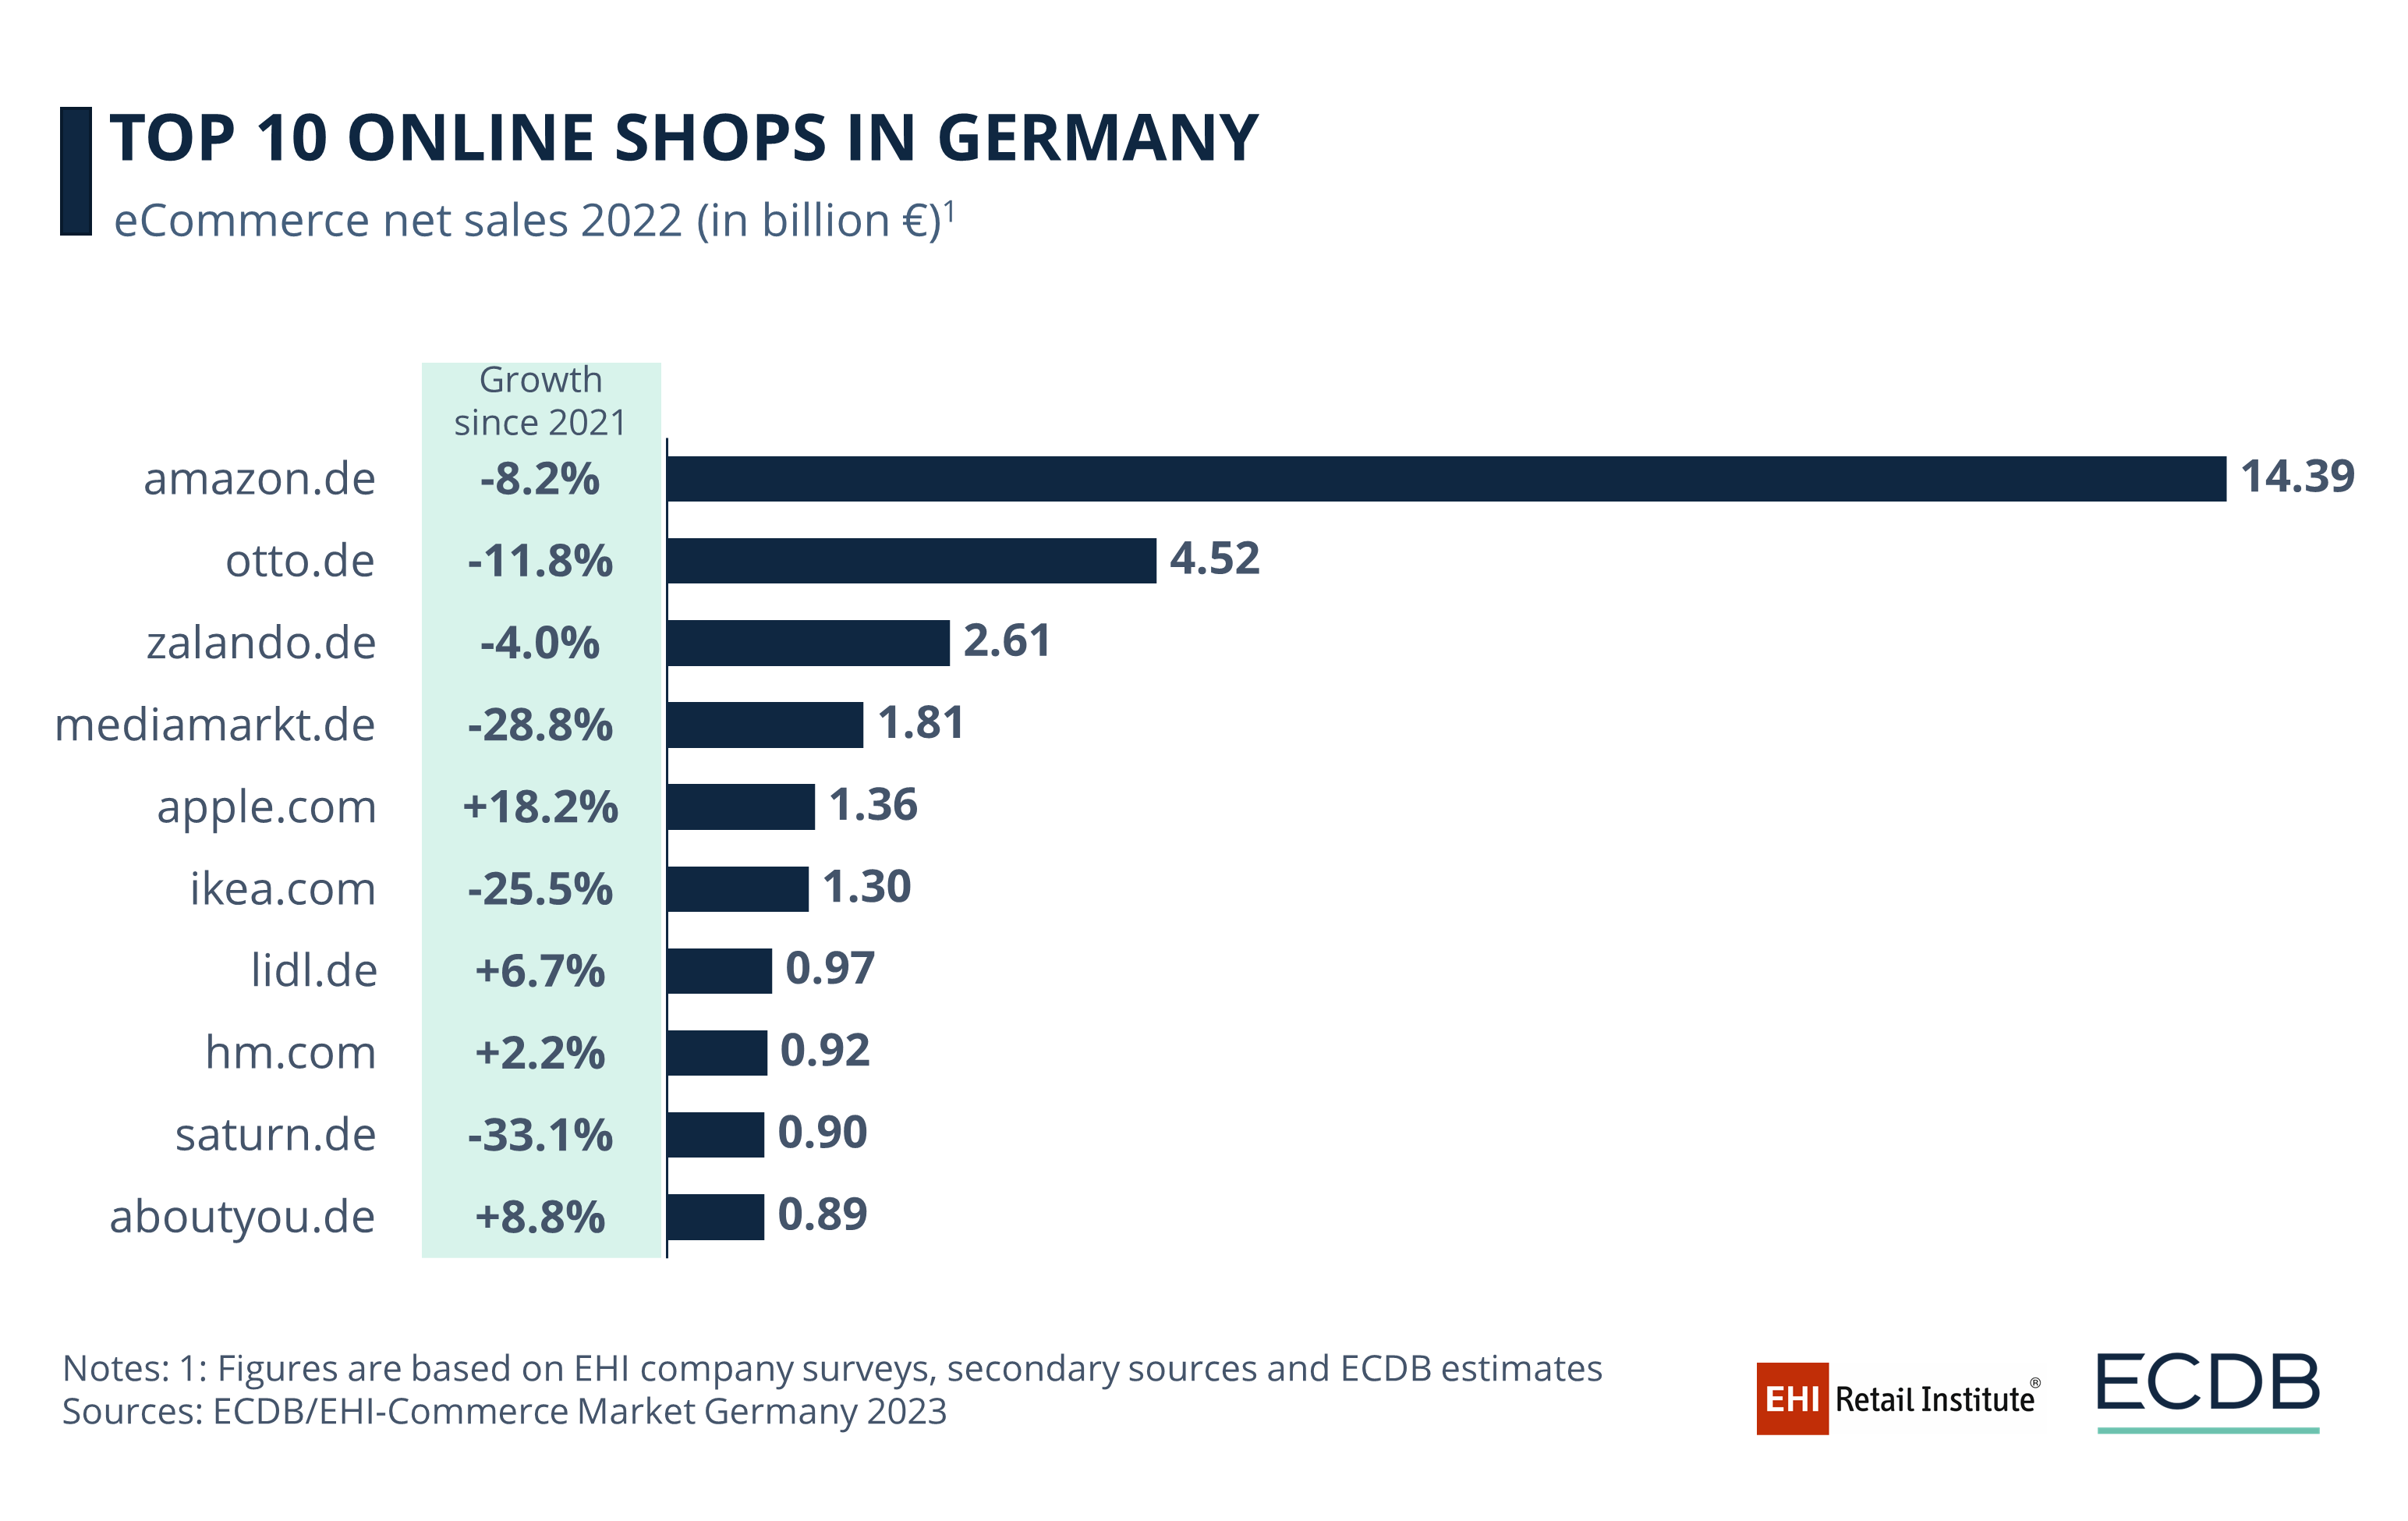 Top 10 Online Shops in Germany in 2022 and Growth